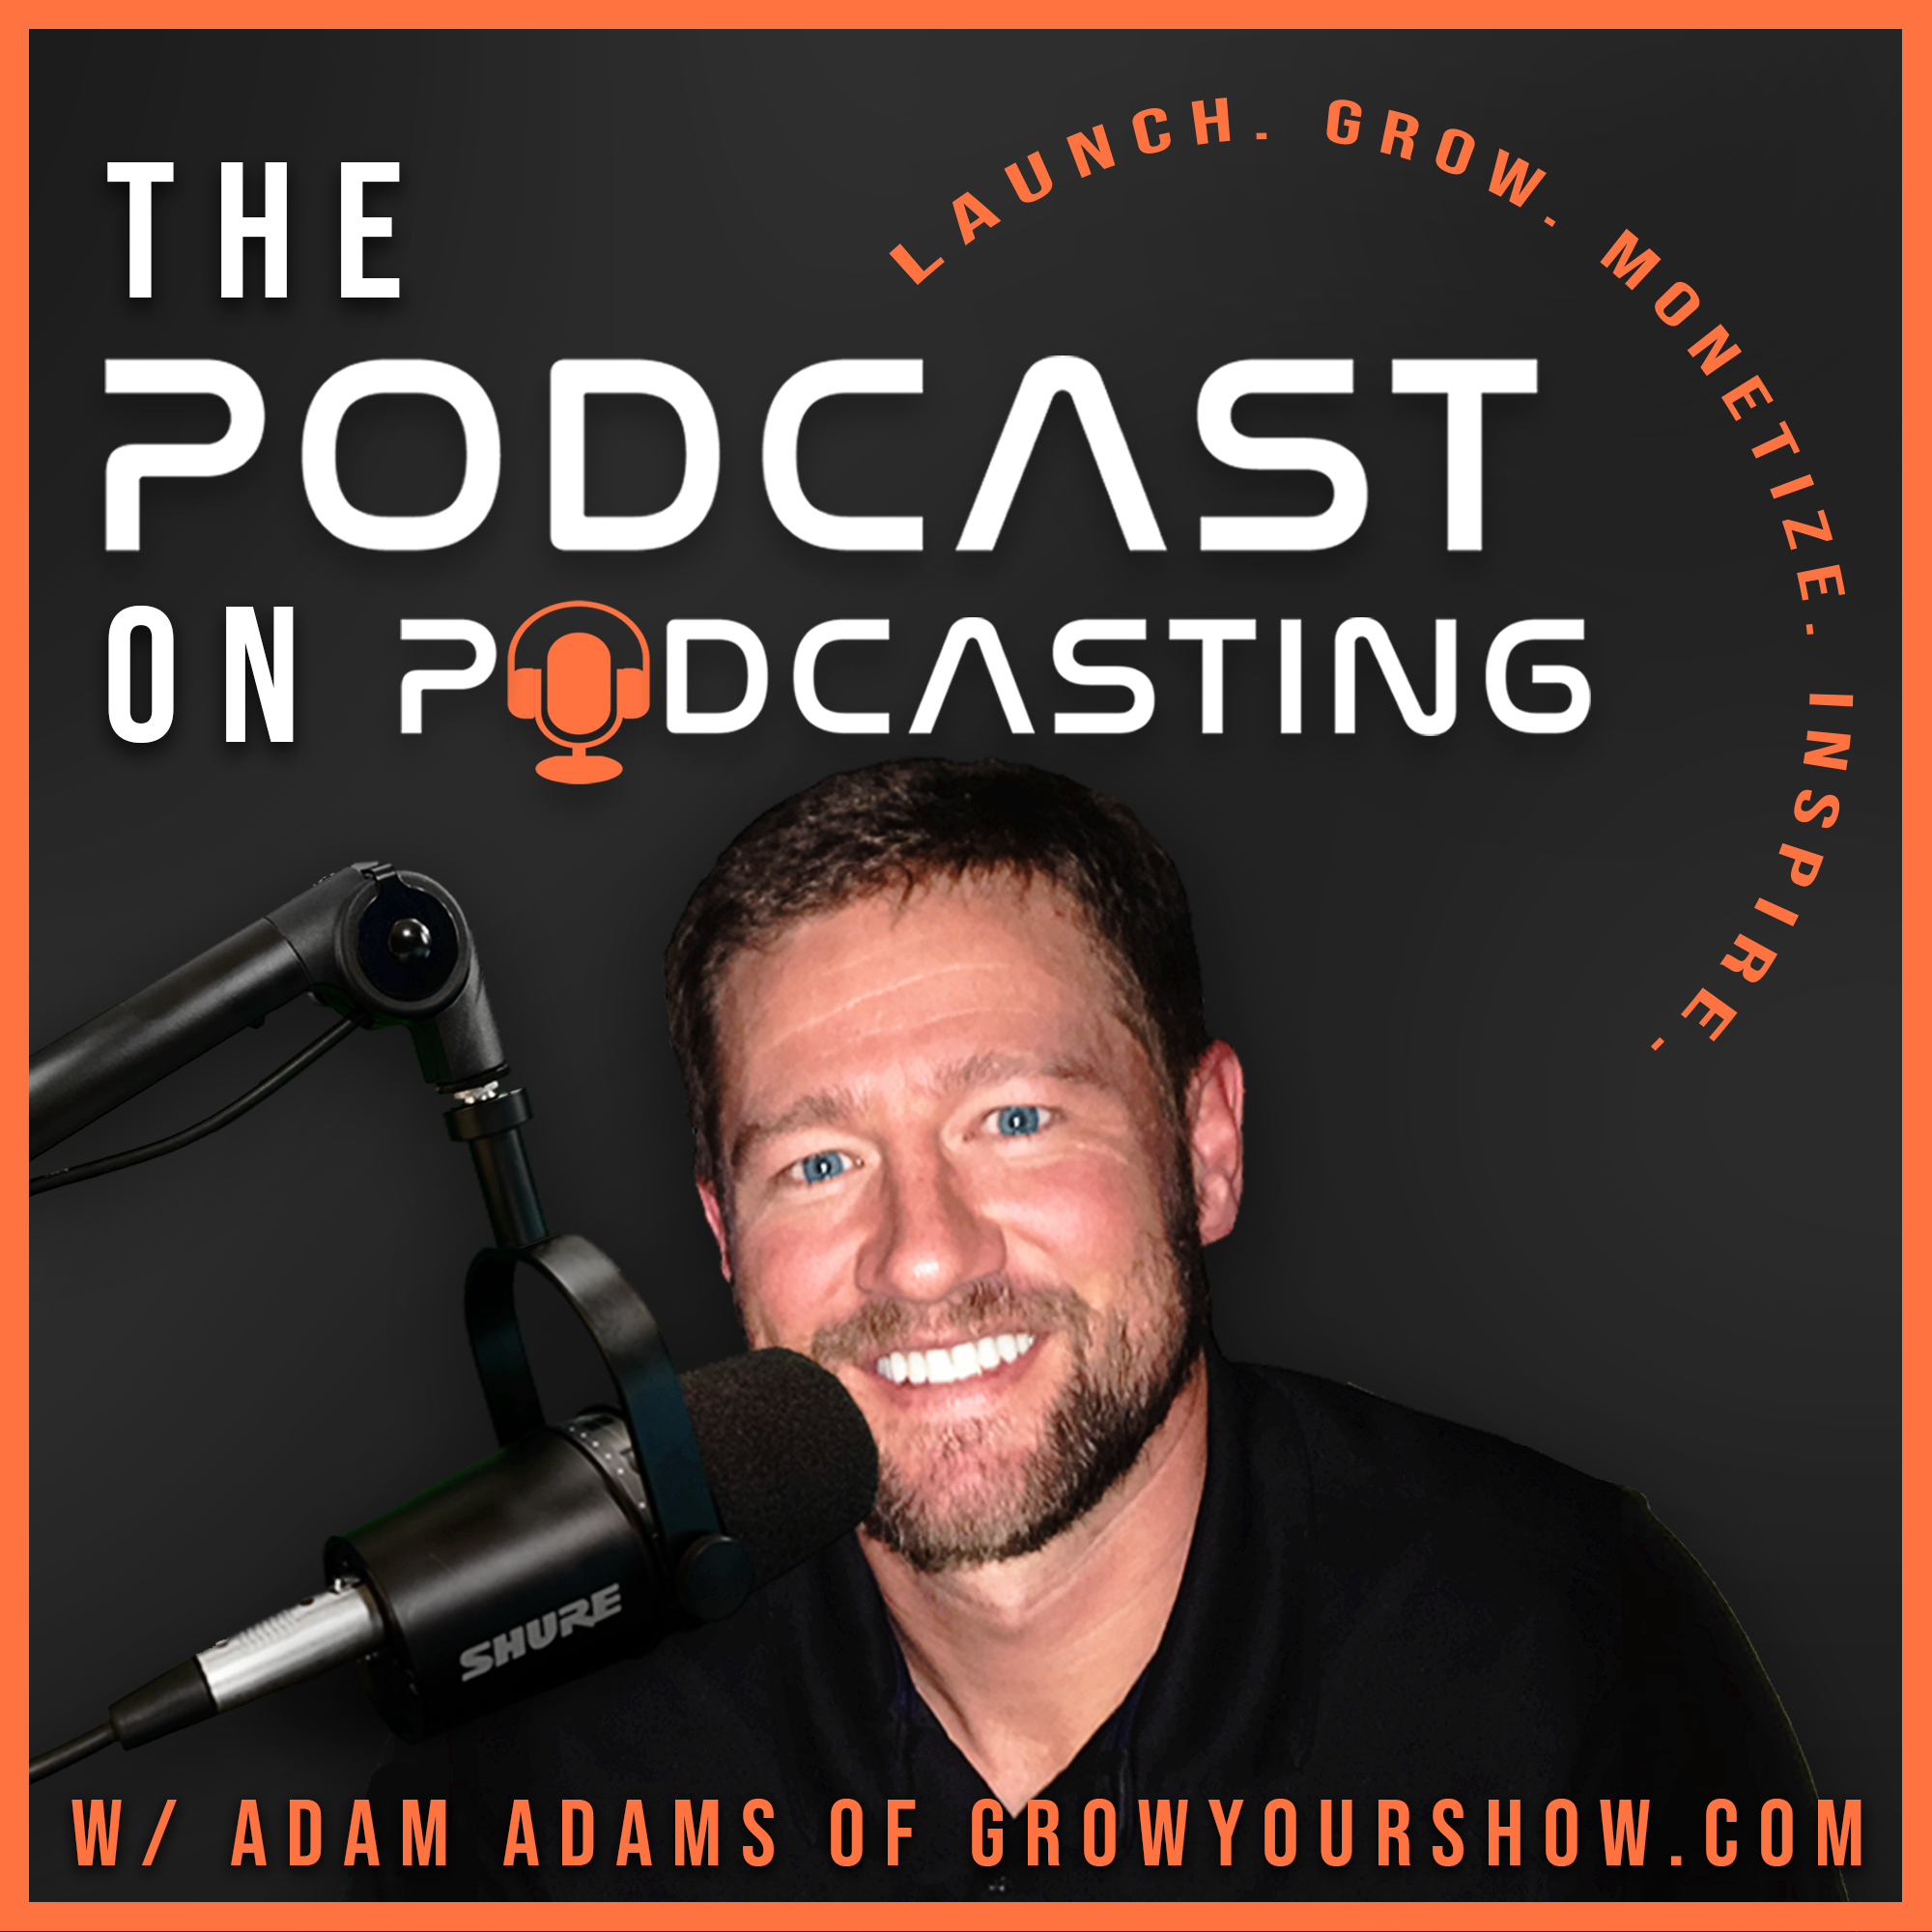 A highlight from Ep386: 3 Ways To Make Money From Your Show